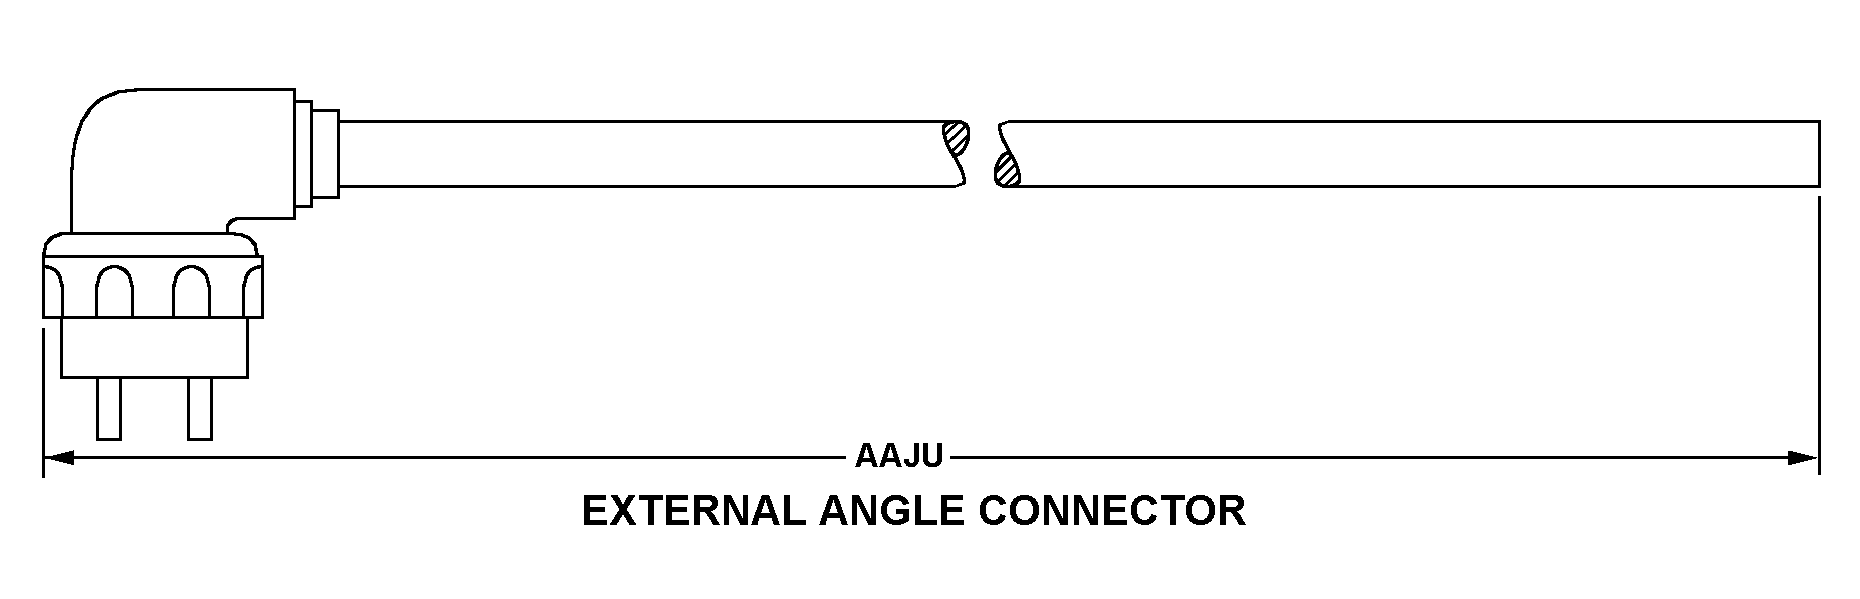 EXTERNAL ANGLE CONNECTOR style nsn 5995-01-293-3239